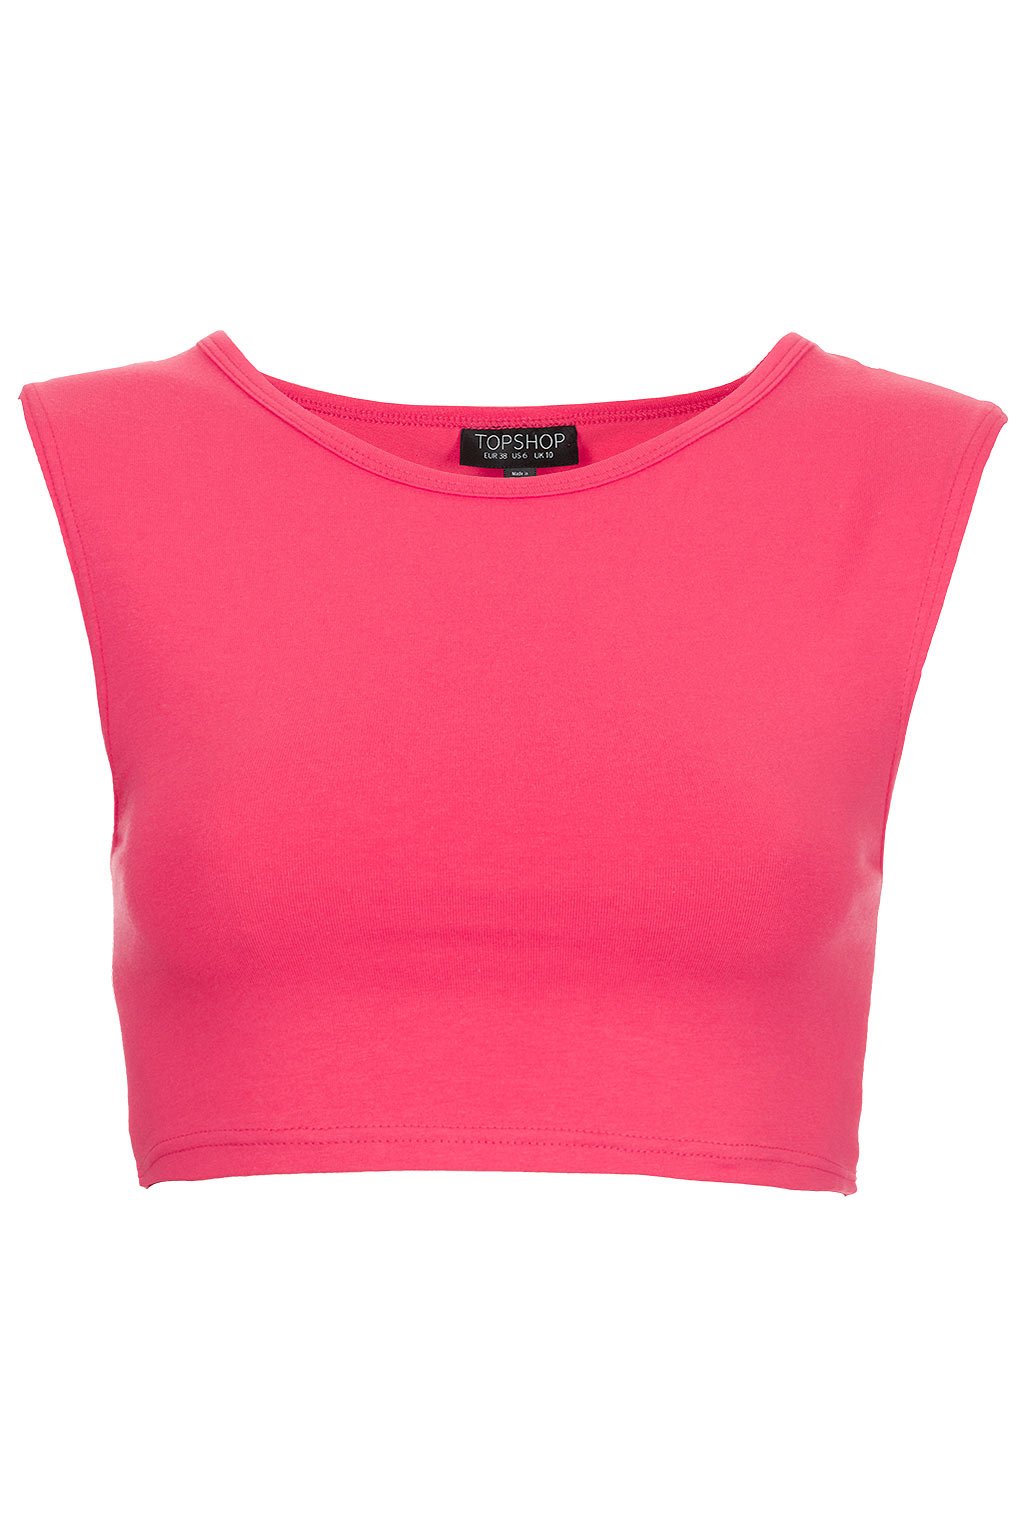 Topshop Stretch Sleeveless Crop Top in Pink | Lyst